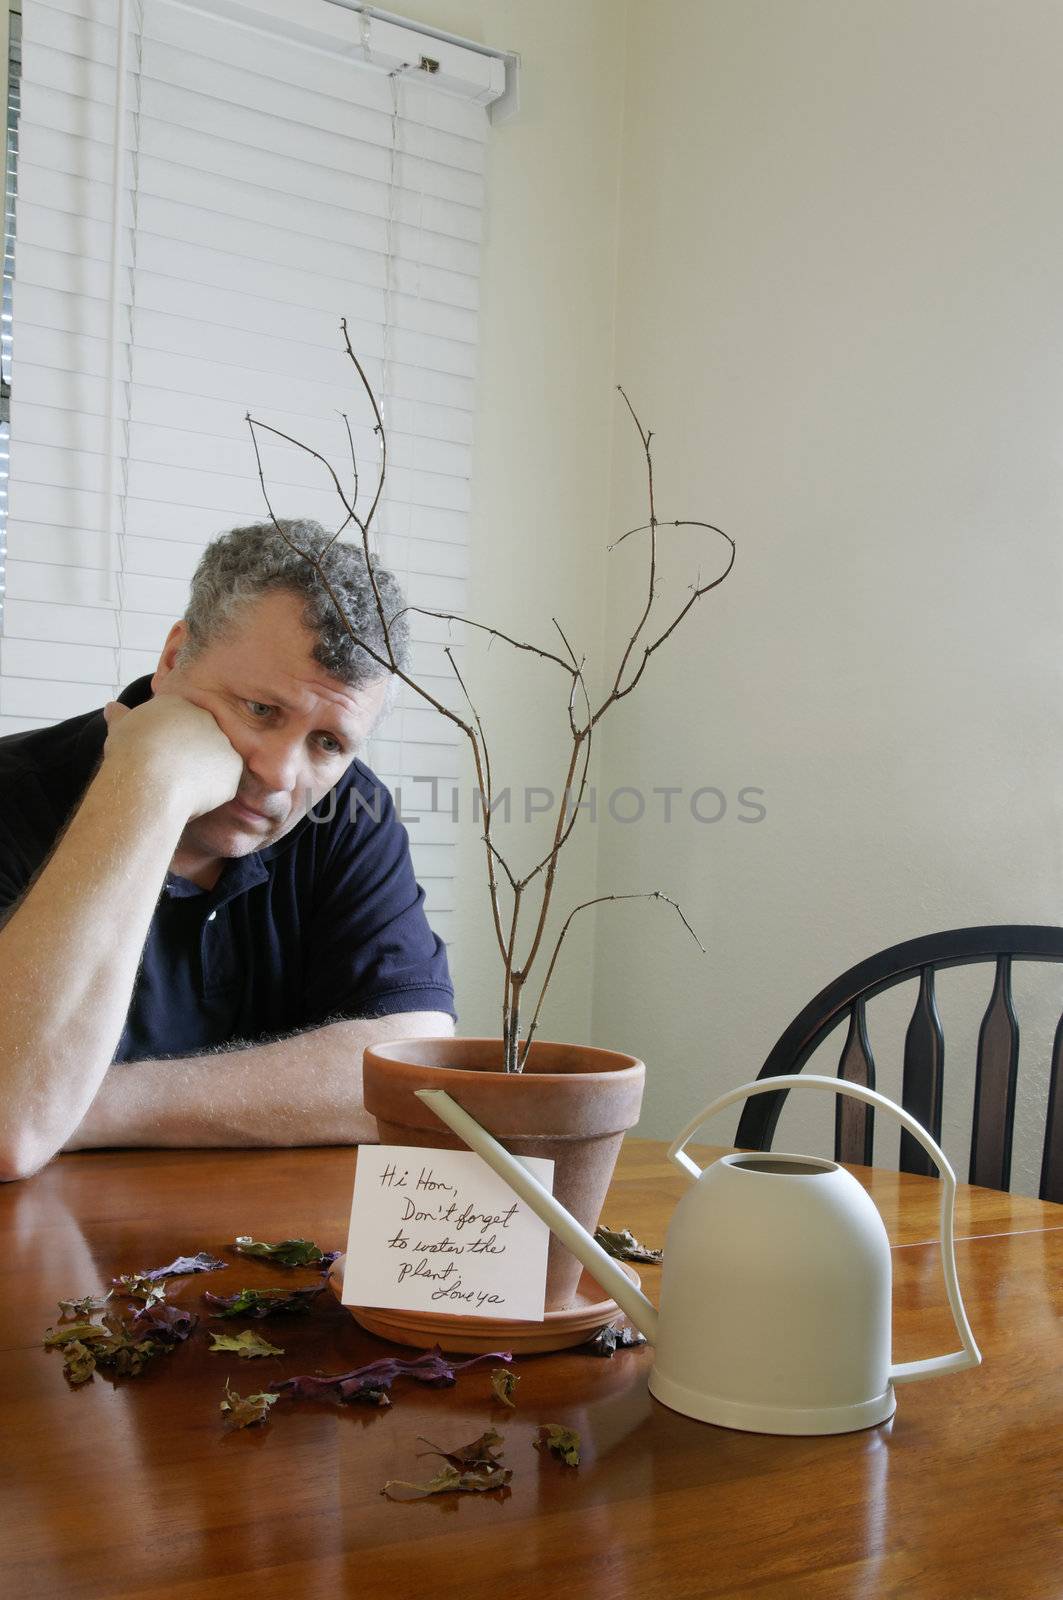 A man looking sad after realizing that he forgot to water his wife's plant.